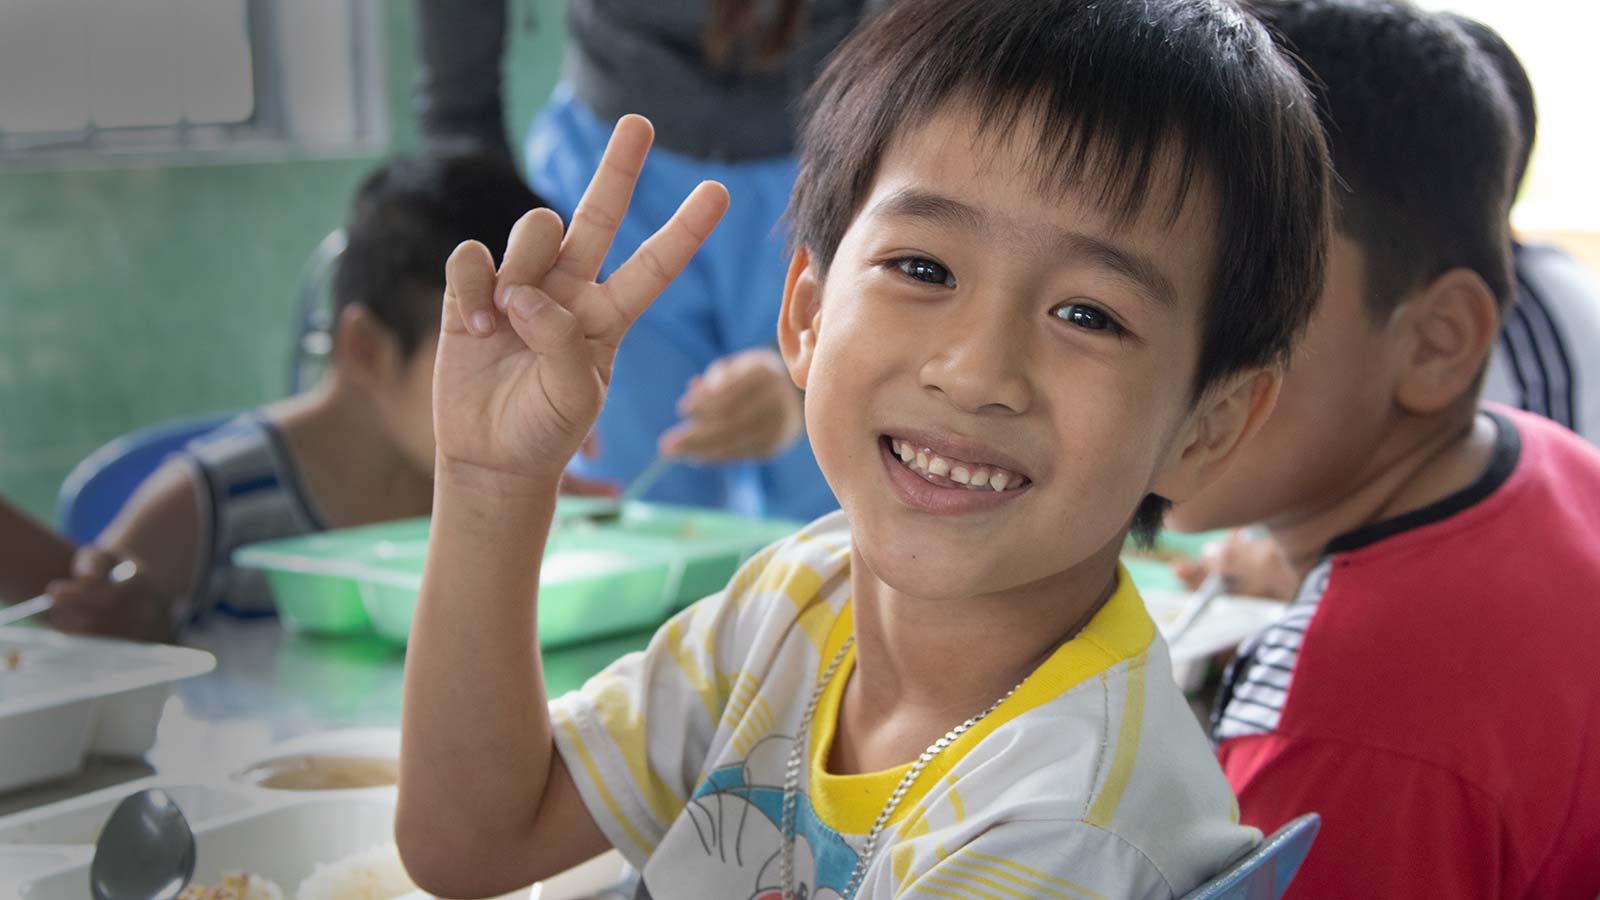 Vietnam boy giving peace sign while eating with fellow children in need of sponsorship support